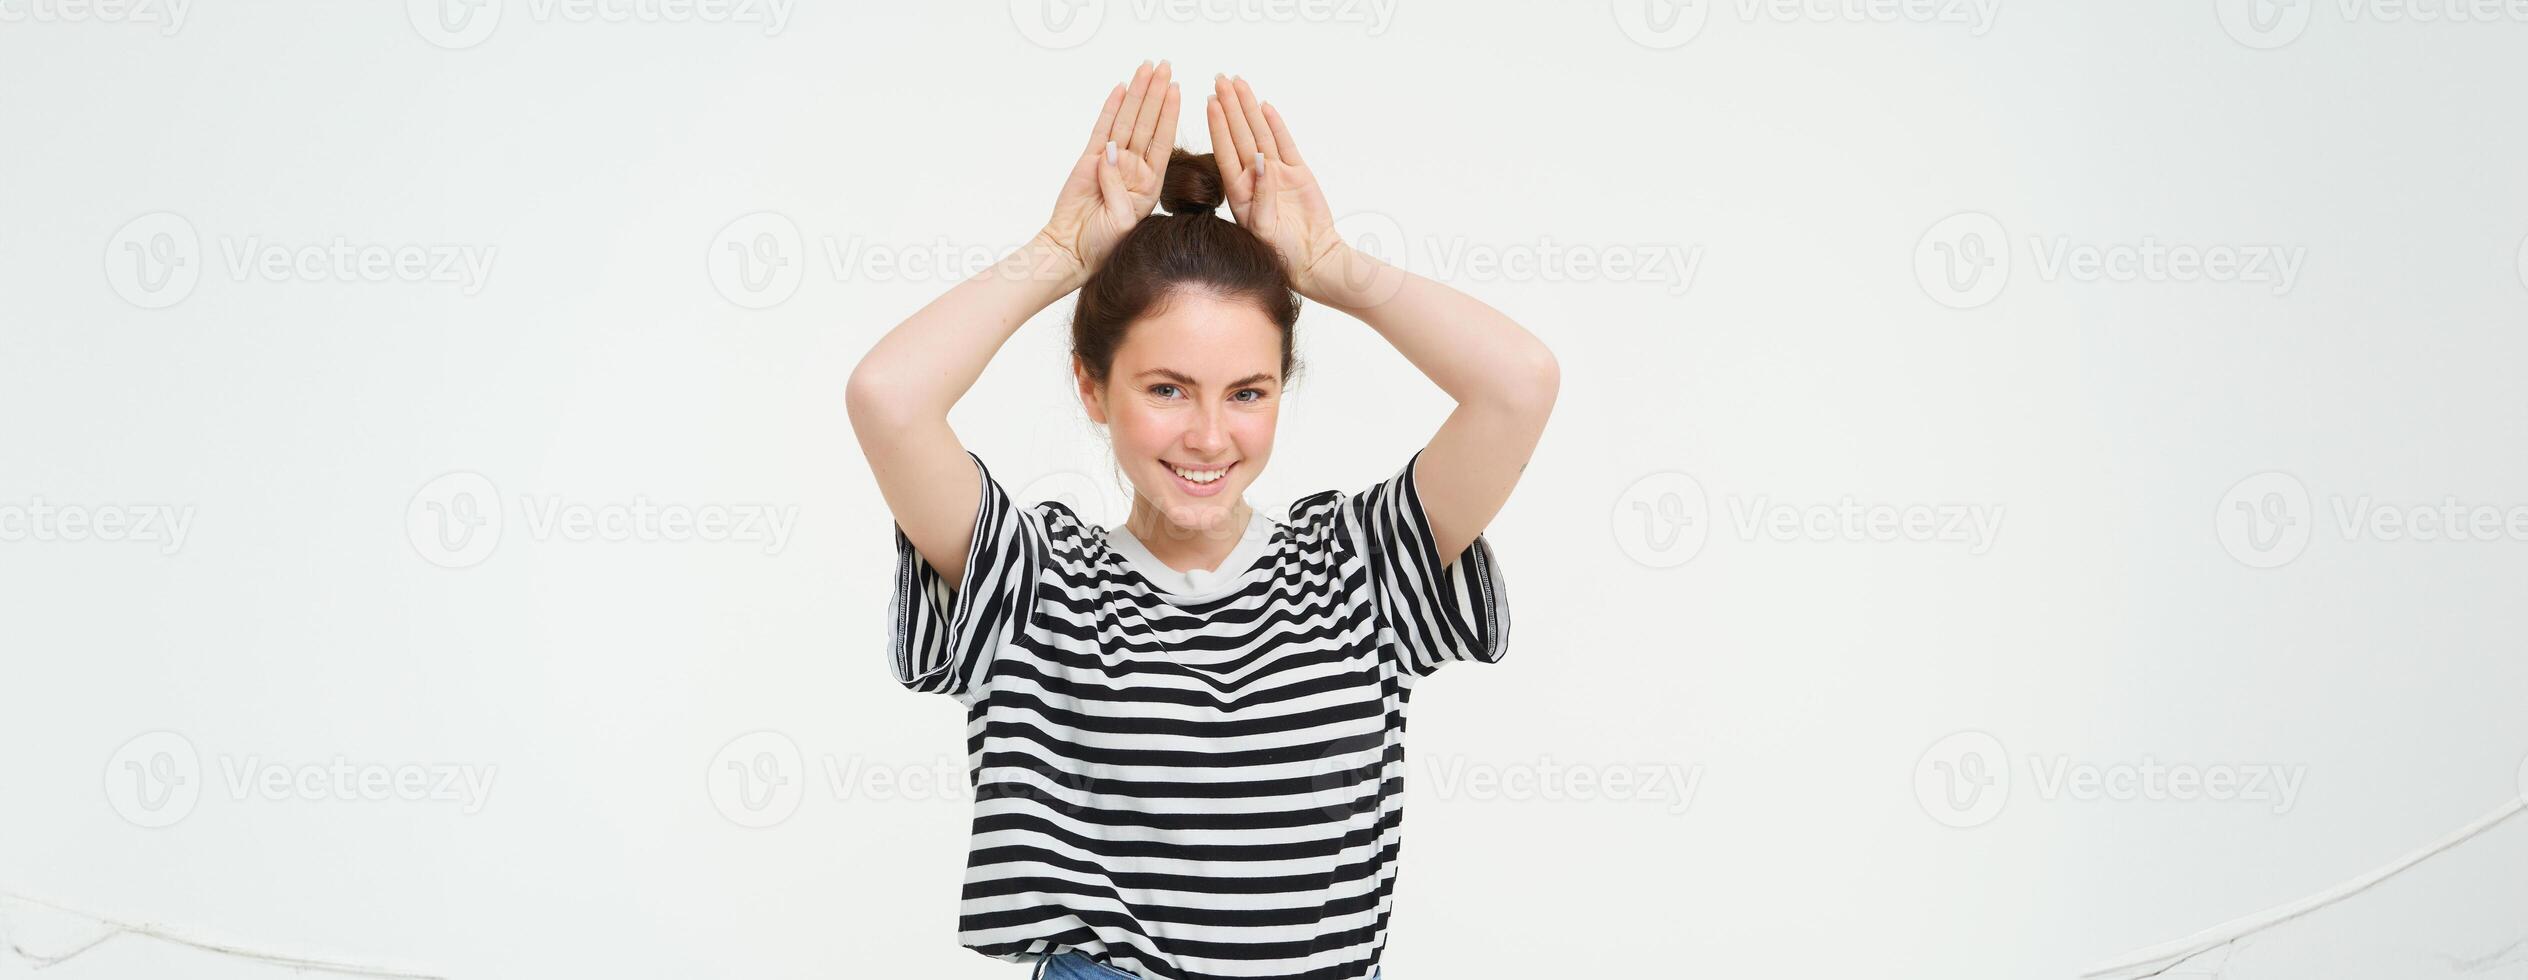 Image of beautiful, happy young woman showing bunny ears on top of her head, looking excited, posing over white background photo